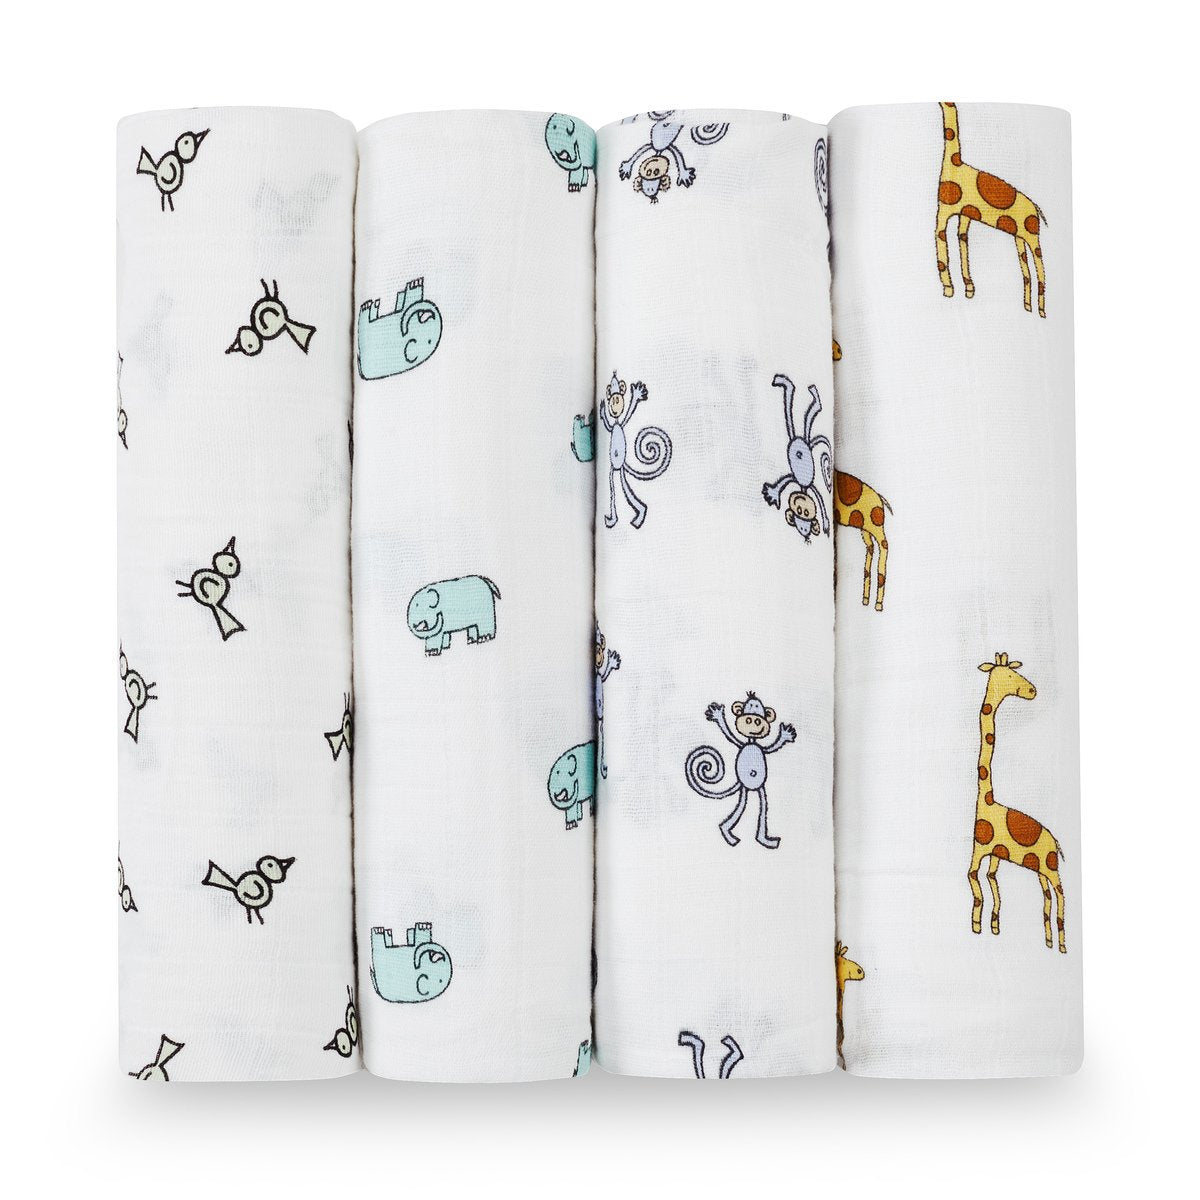 aden + anais Swaddle Blanket, Boutique Muslin Blankets for Girls & Boys, Baby Receiving Swaddles, Ideal Newborn & Infant Swaddling Set